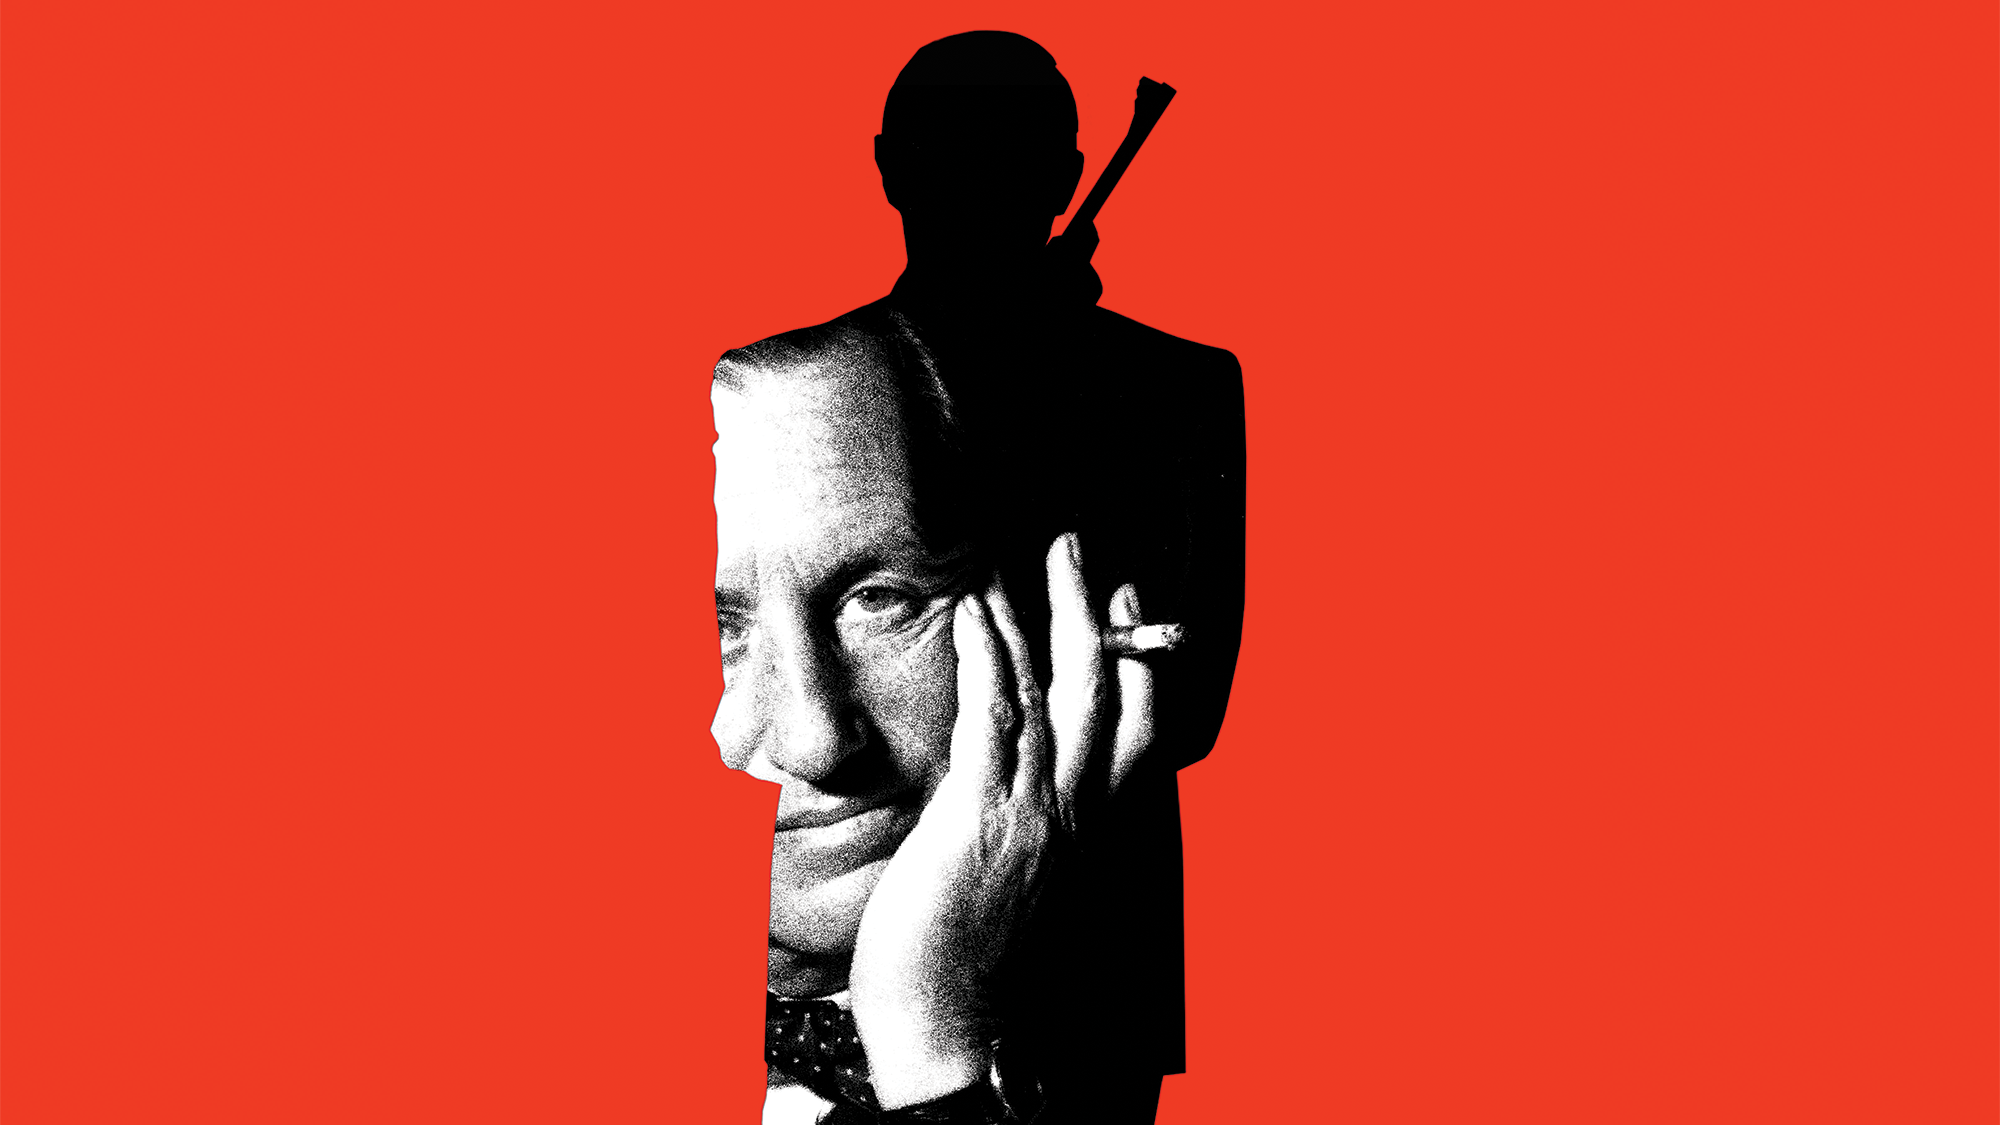 Against a red backdrop, a silhouette of James Bond with black-and-white photo of the author Ian Fleming inside